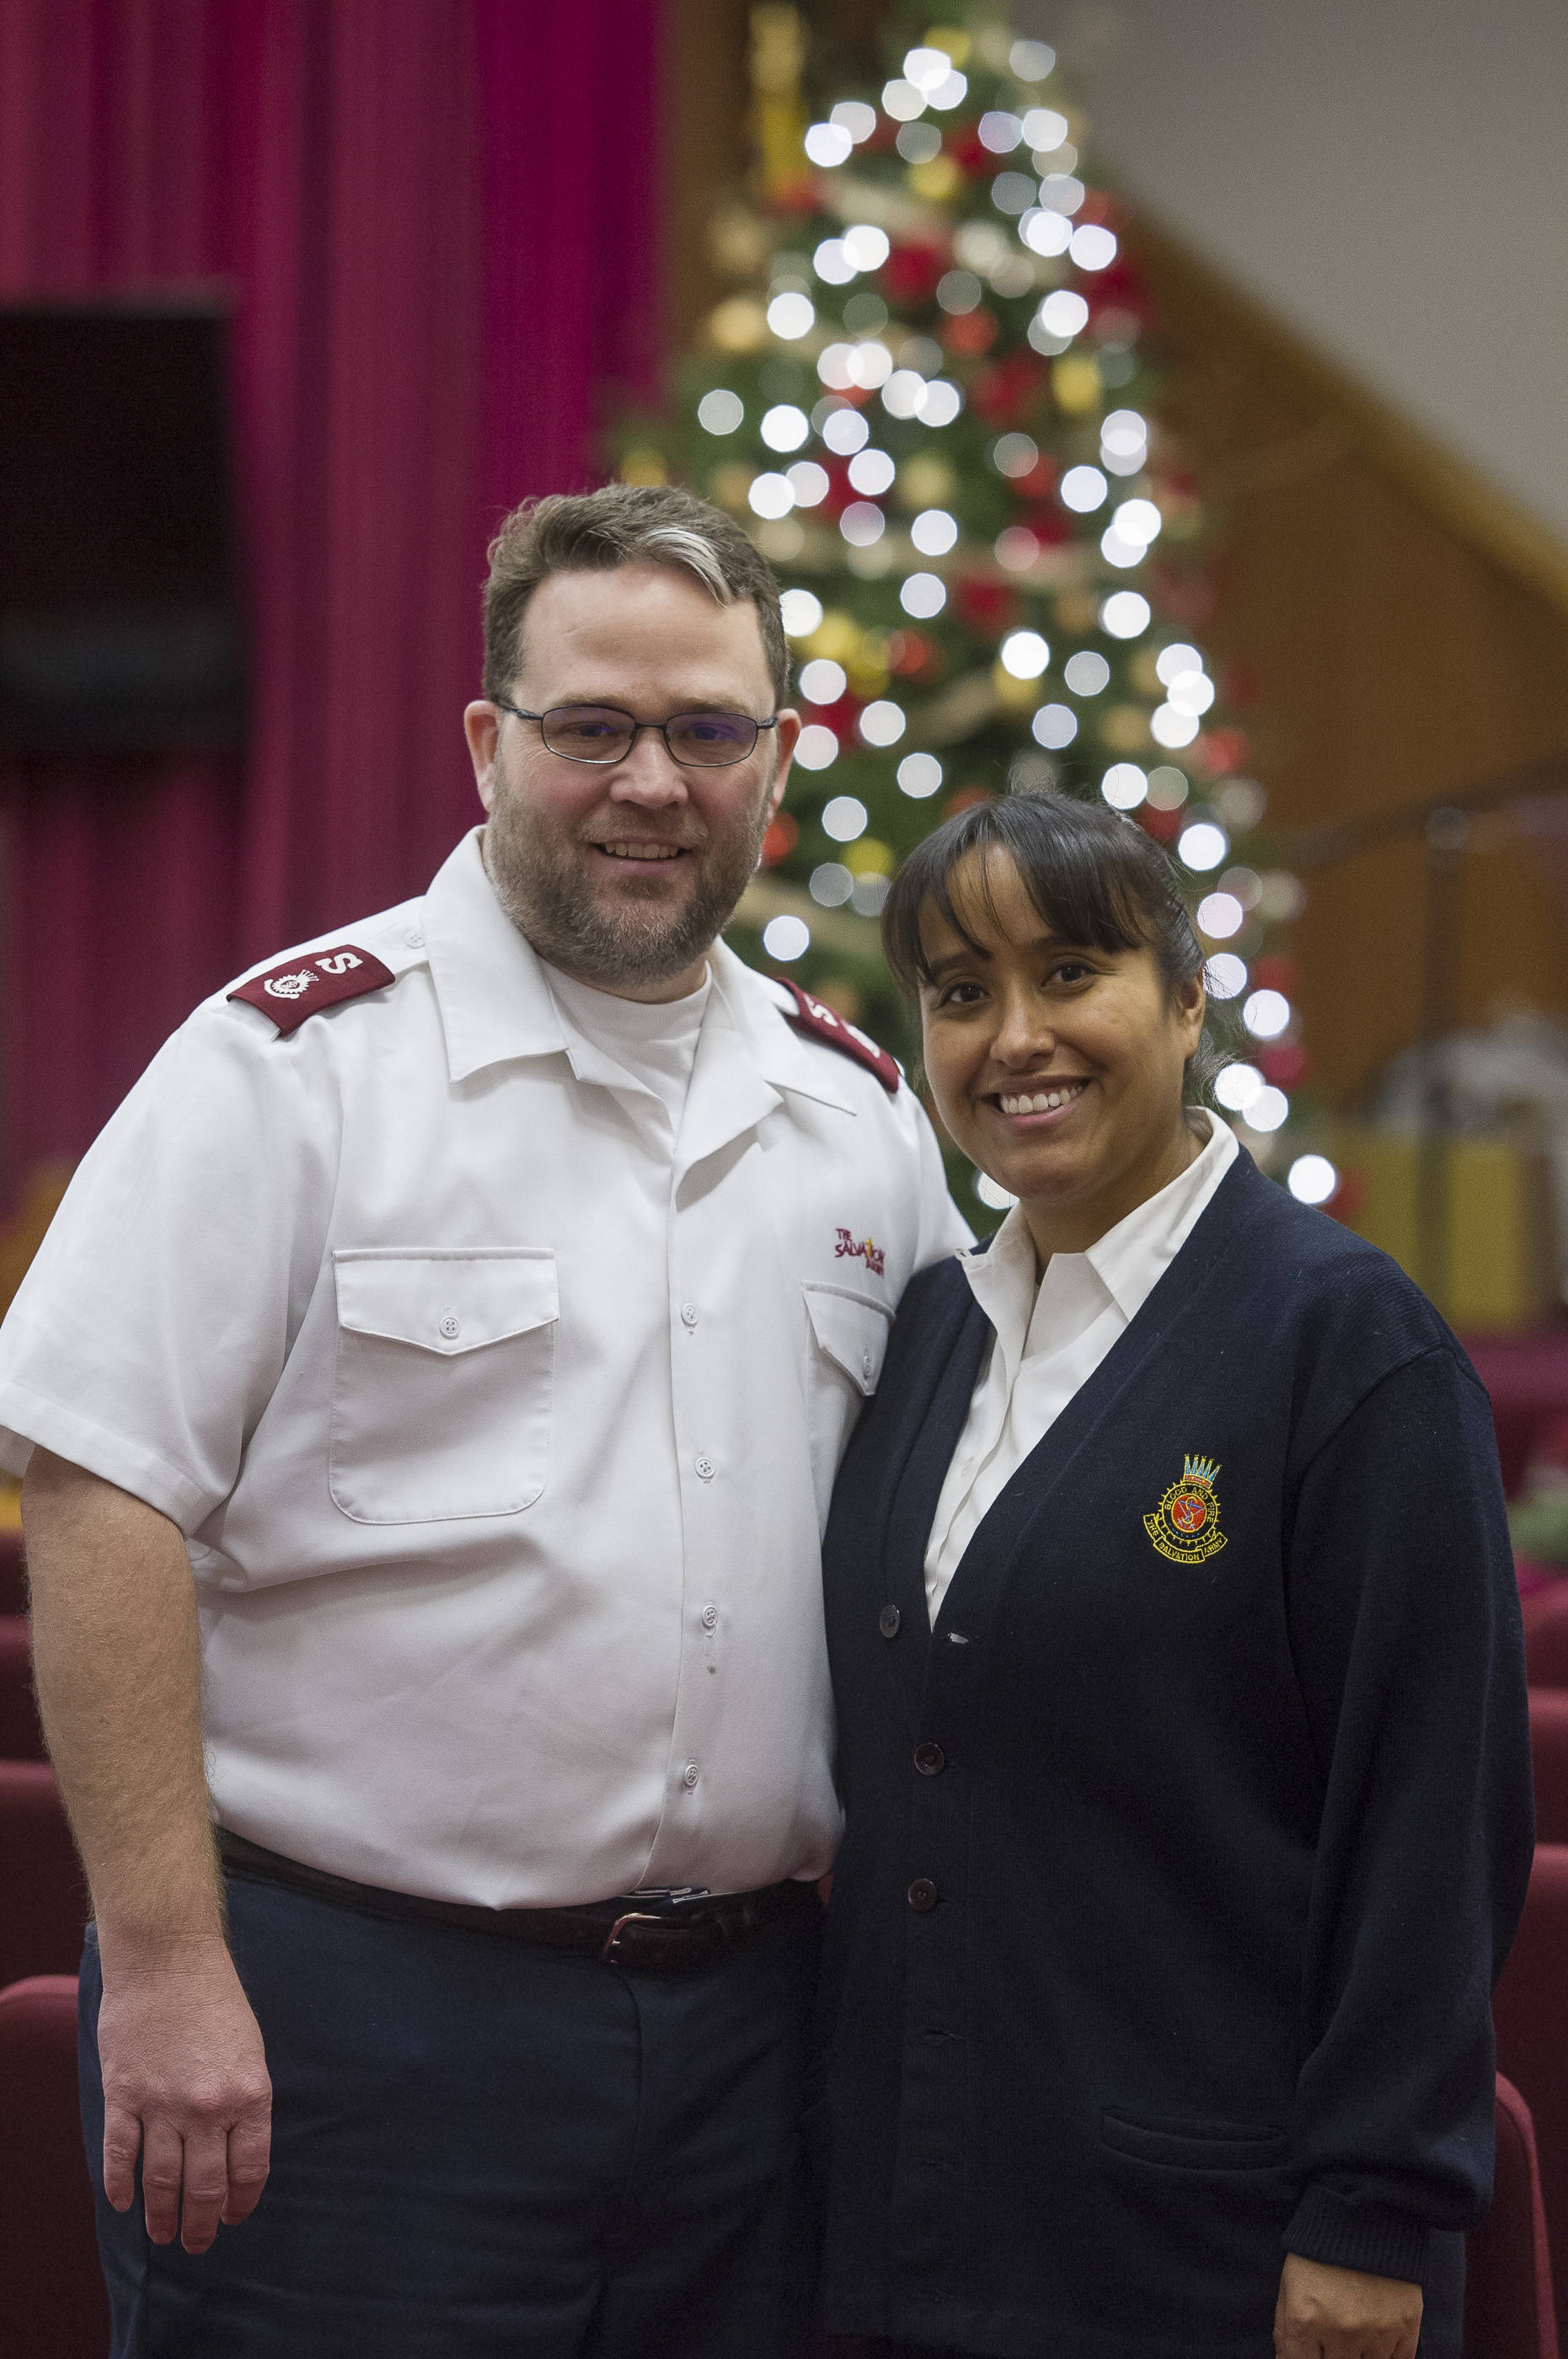 Majors Shane and Gina Halverson are the new directors of the Salvation Army in Juneau. Gina is originally from Hoonah. (Michael Penn | Juneau Empire)